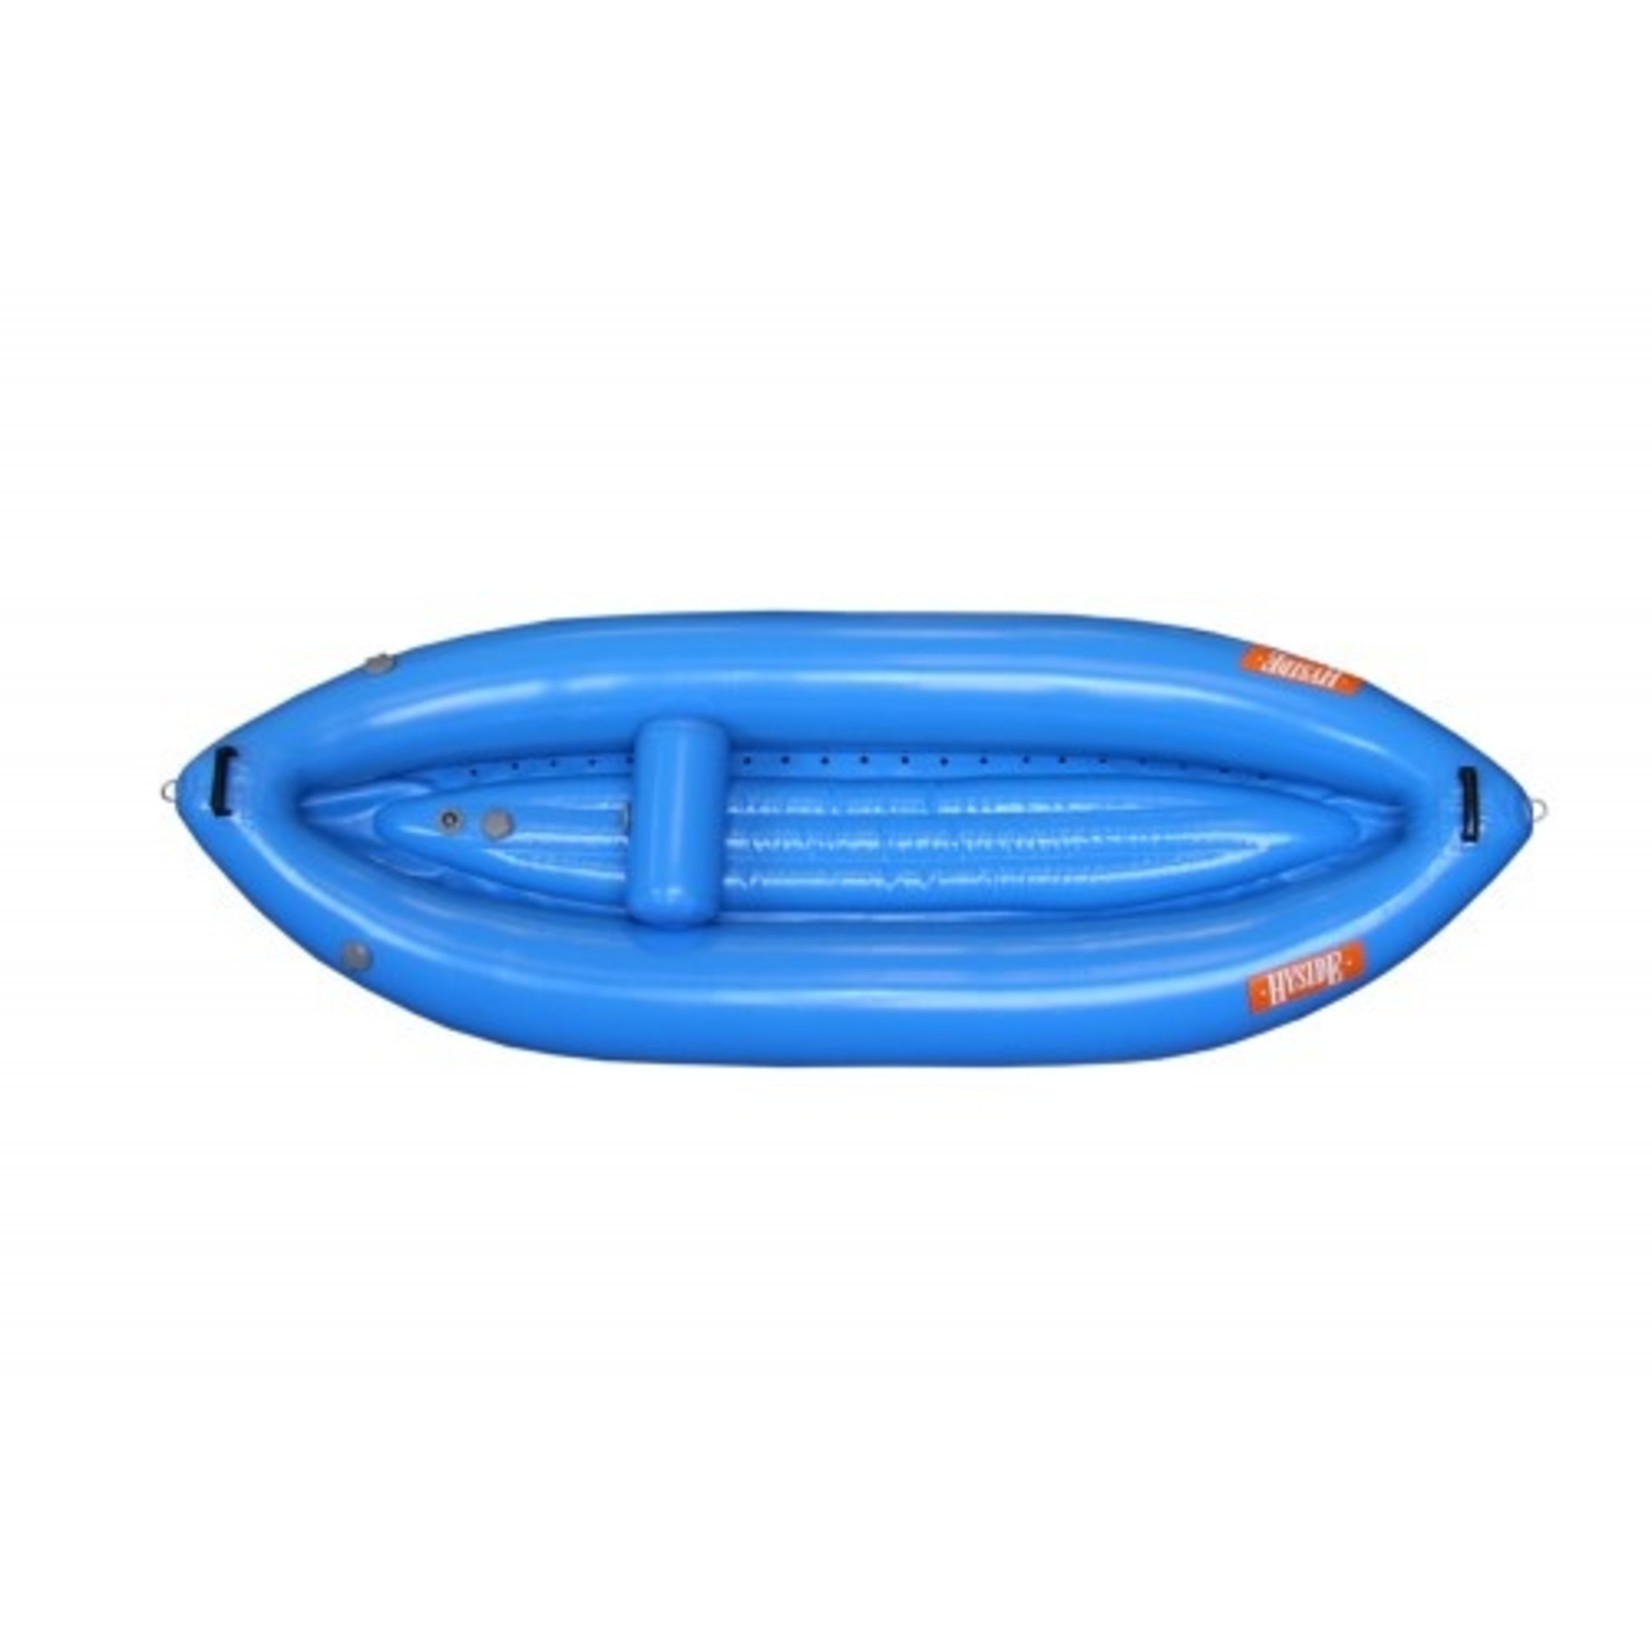 Hyside Inflatables Hyside K1 9.0 Kayak